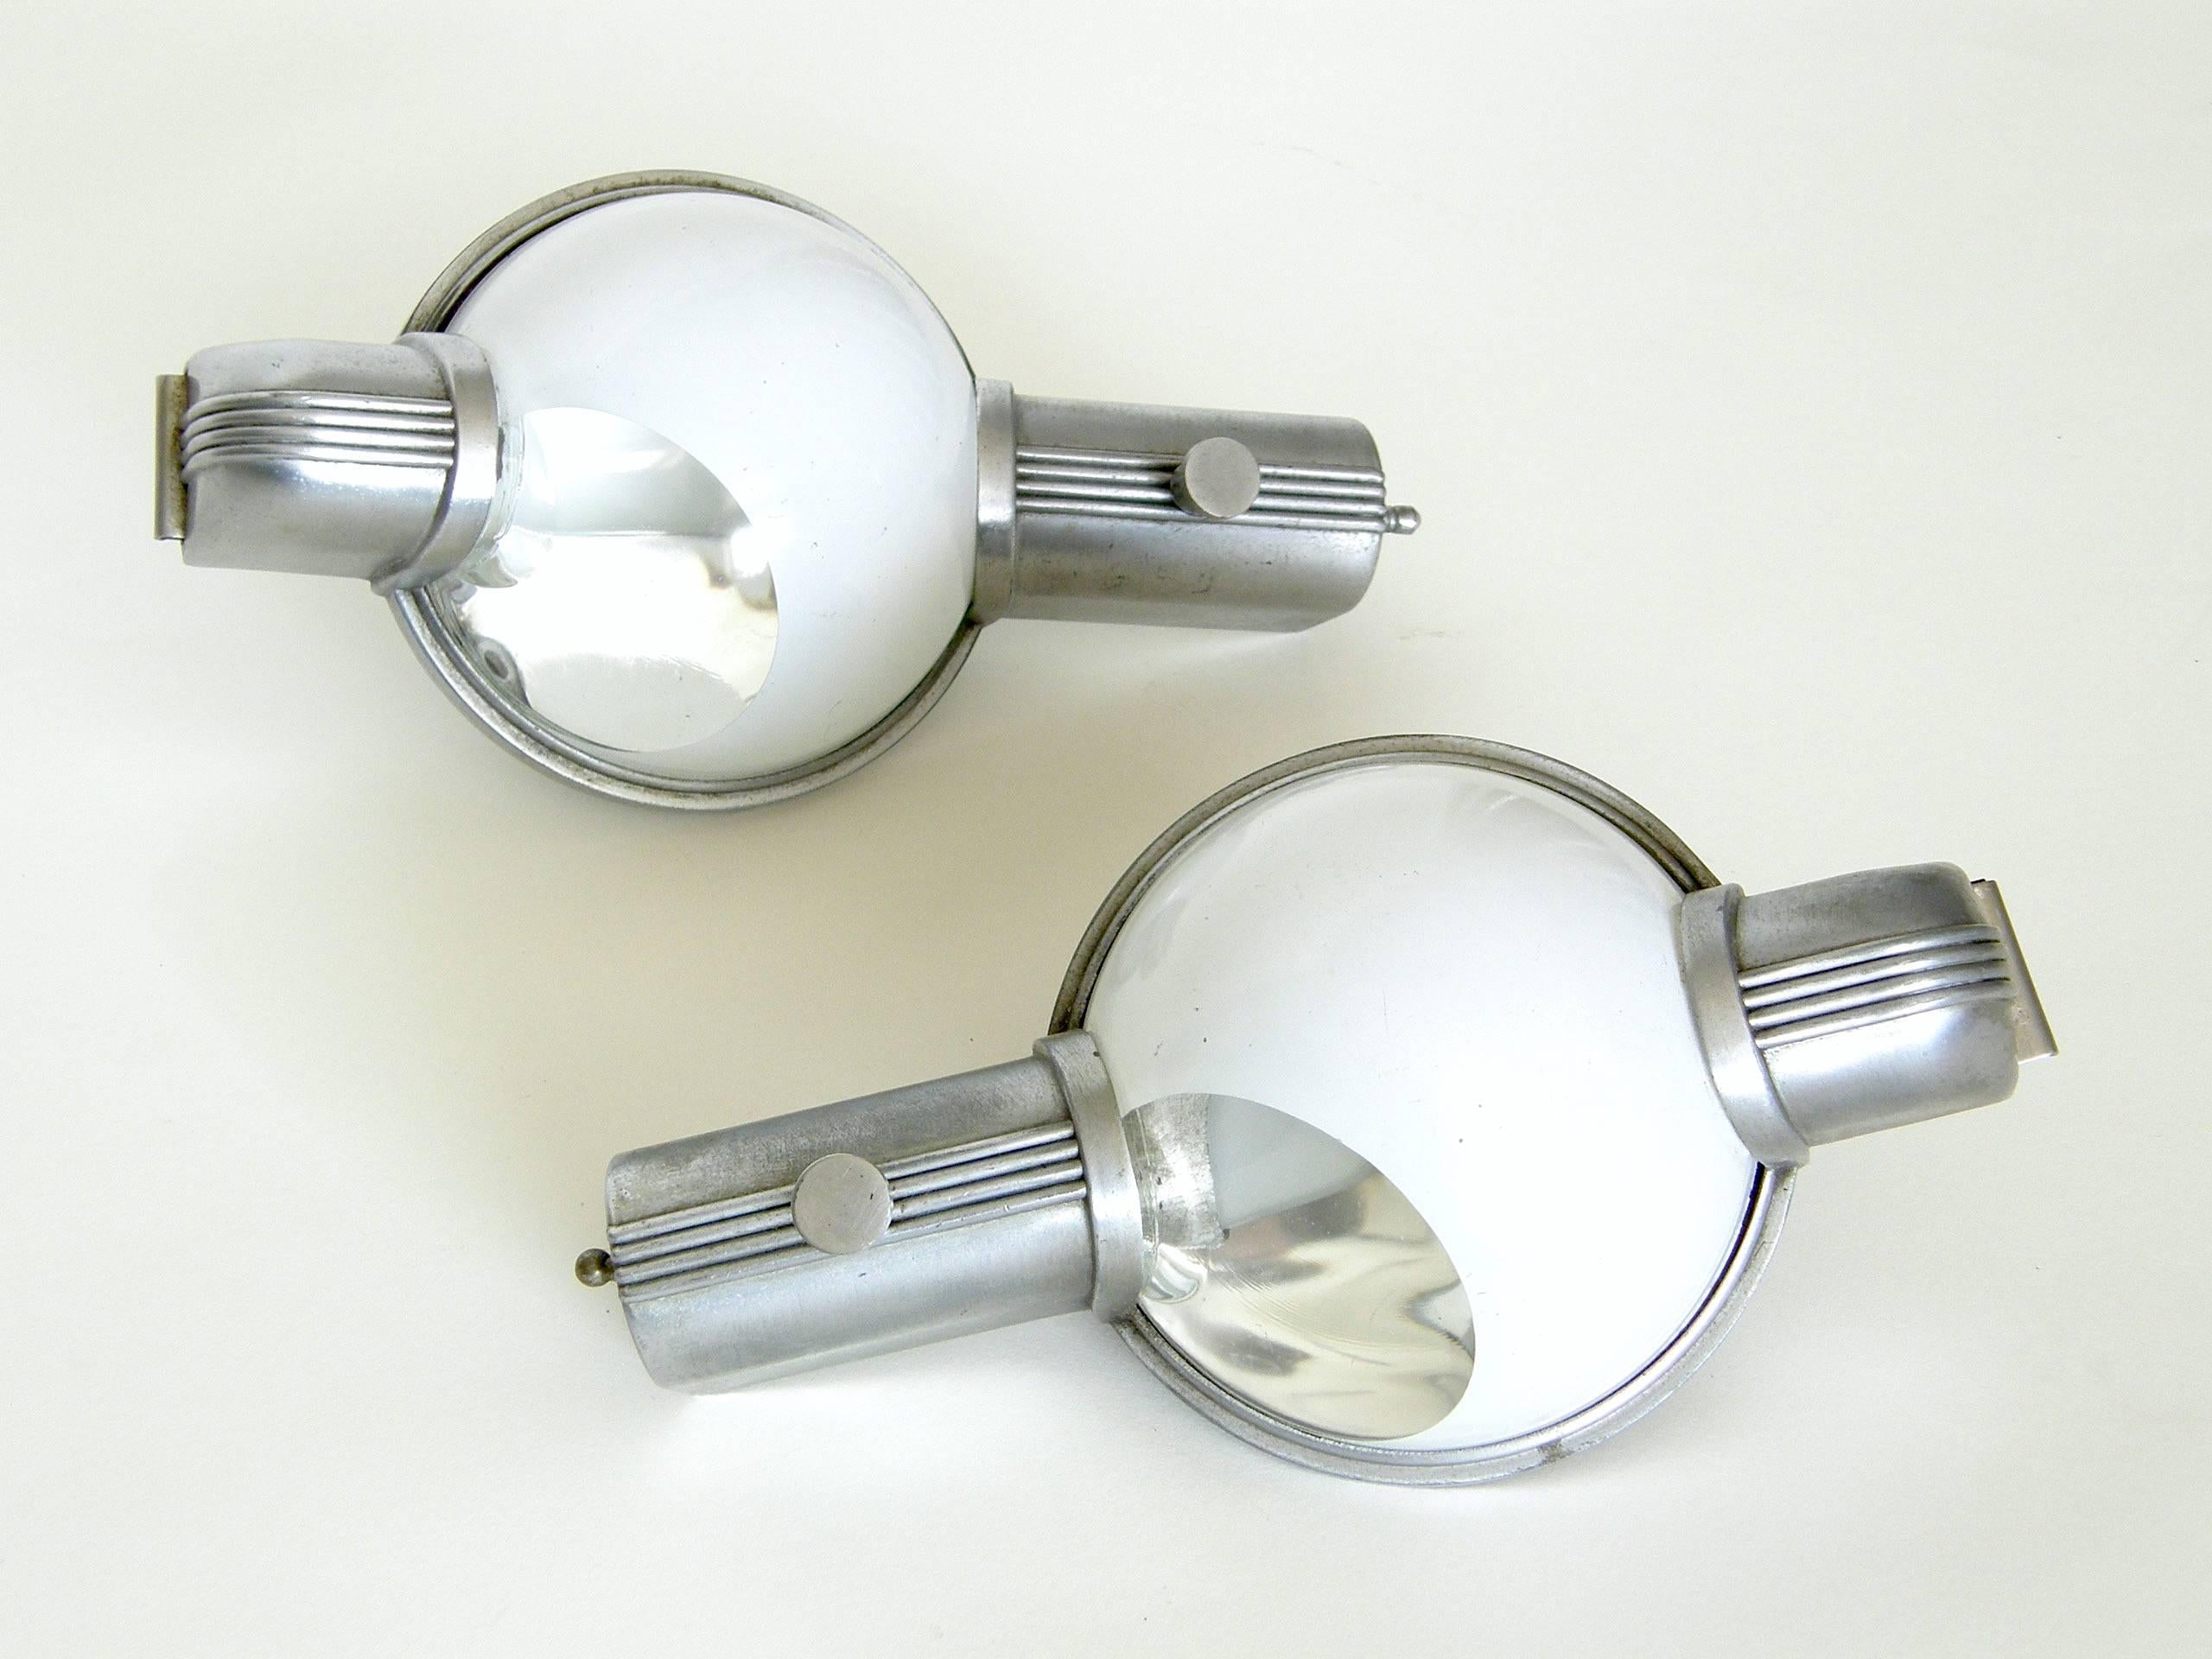 Machine Age Henry Dreyfuss Wall Lamps for the Art Deco 20th Century Ltd Pullman Train Cars